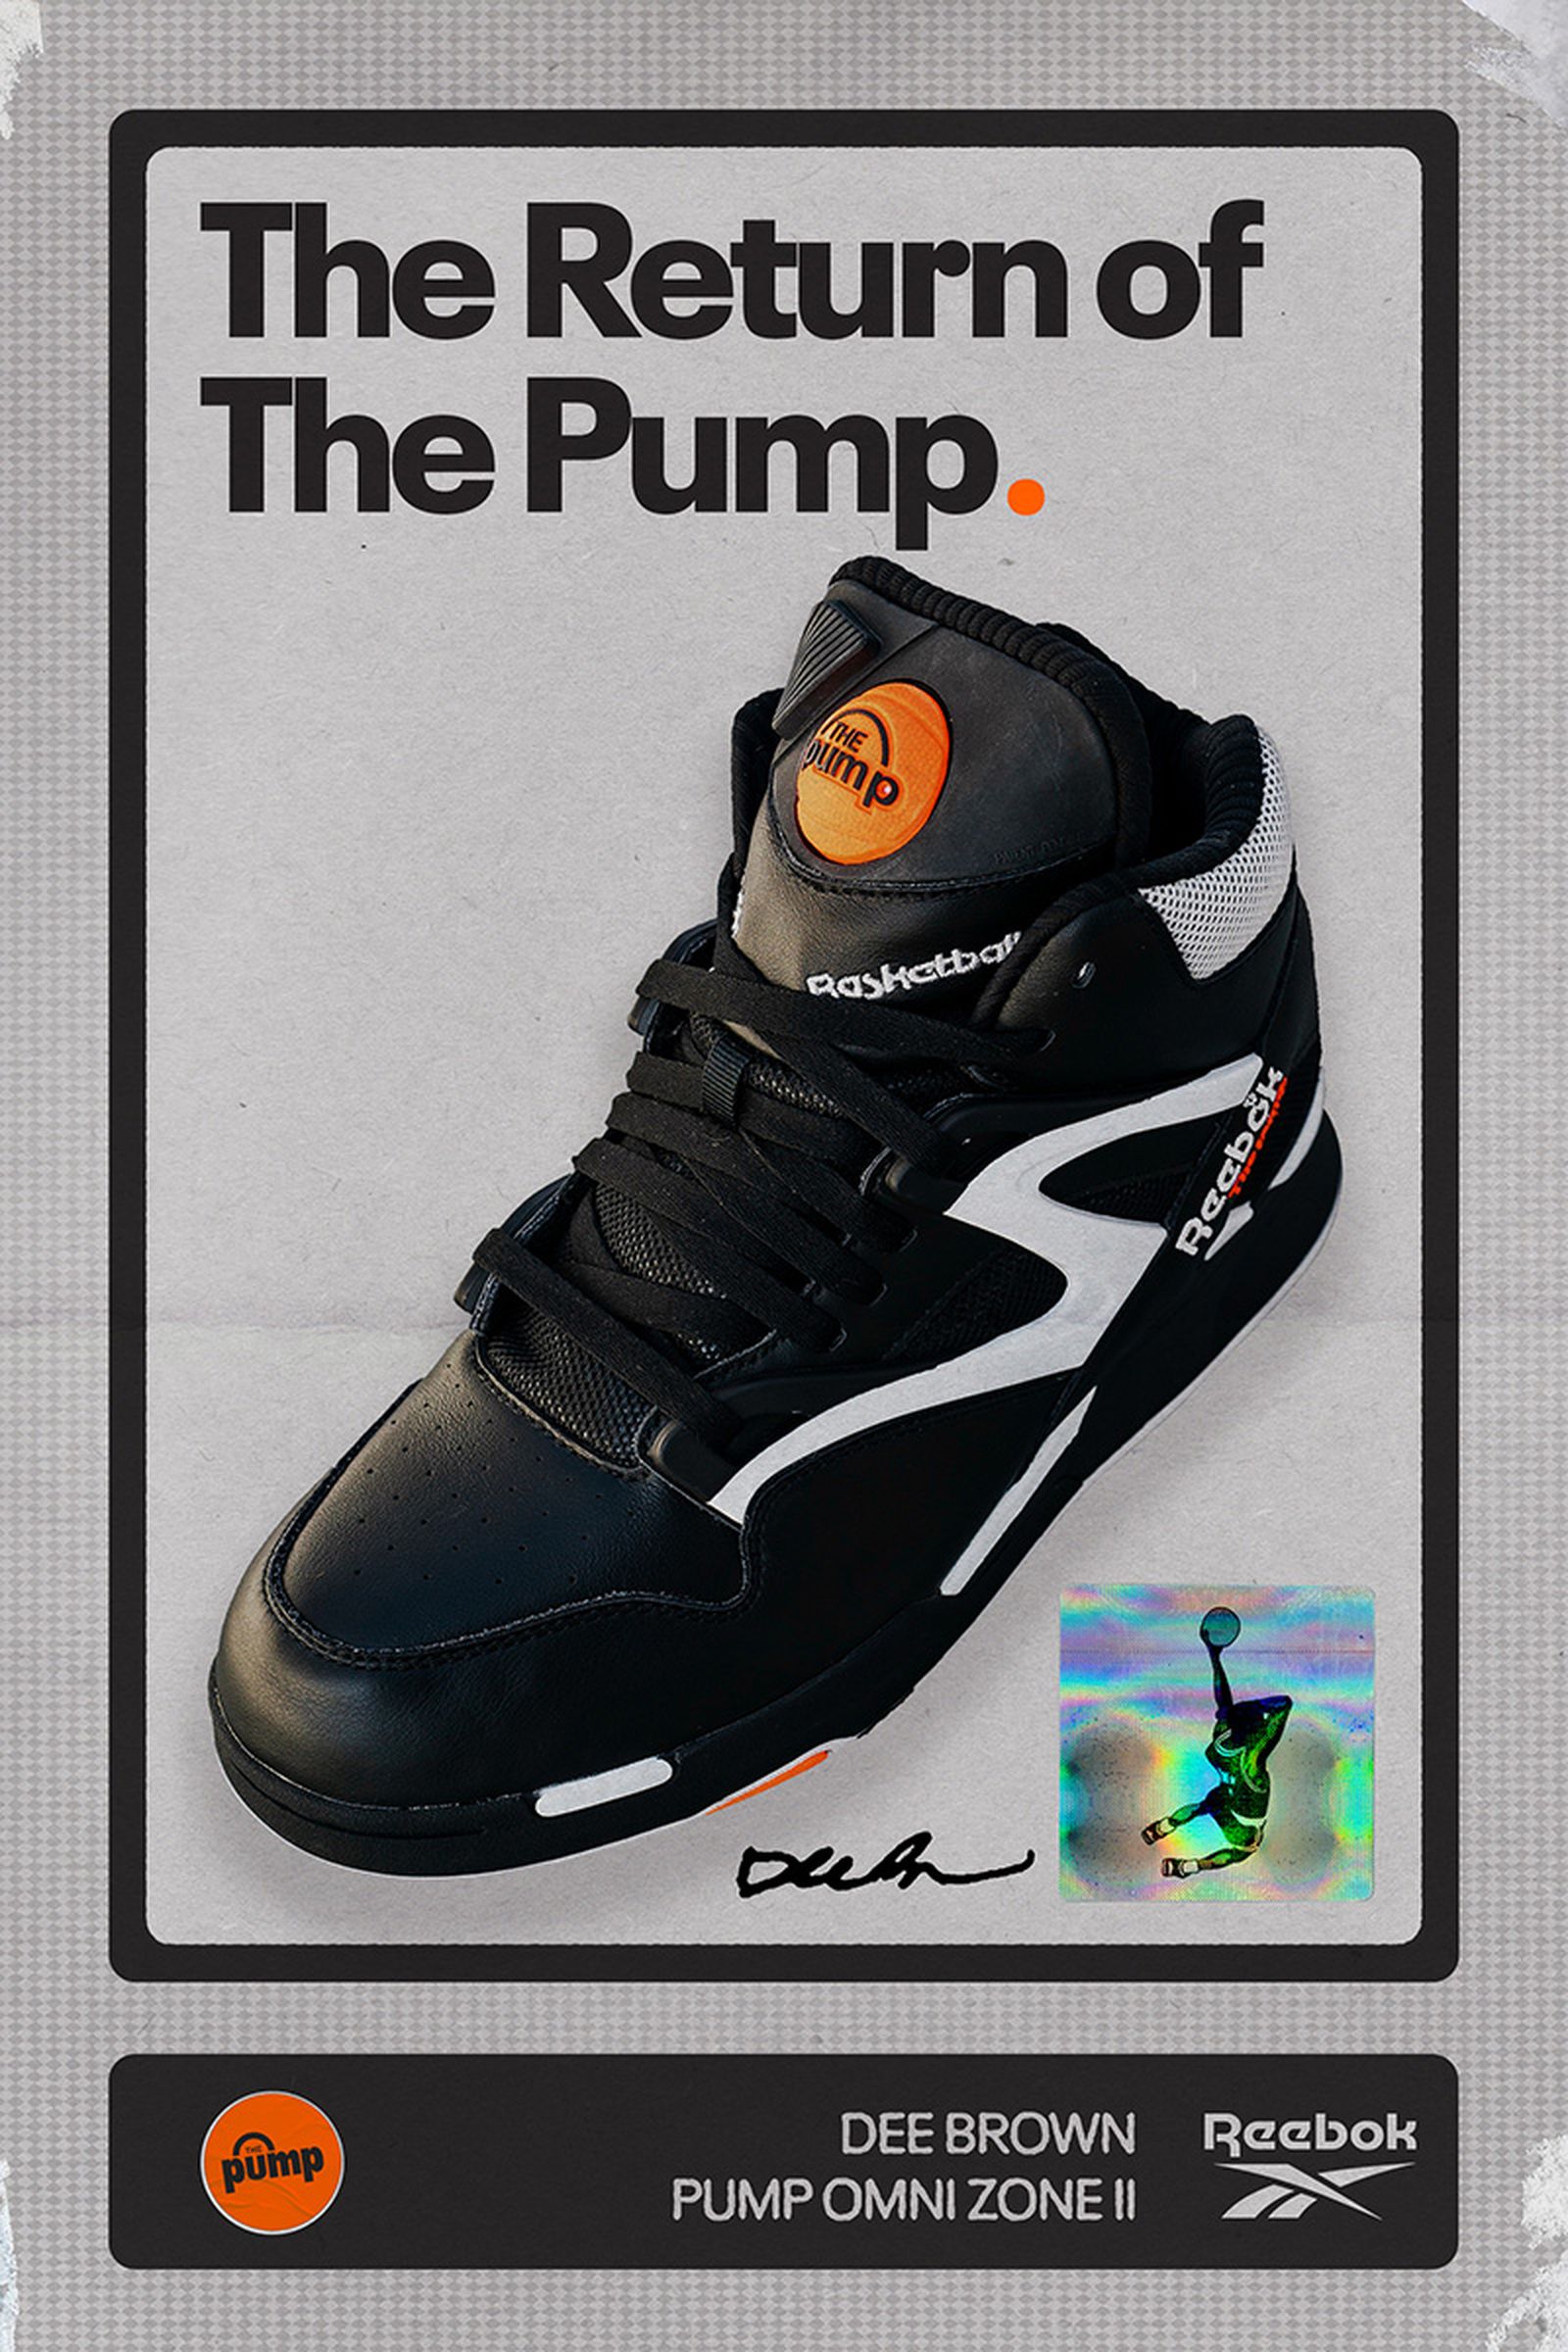 What Year Did the Reebok Pump Come Out?